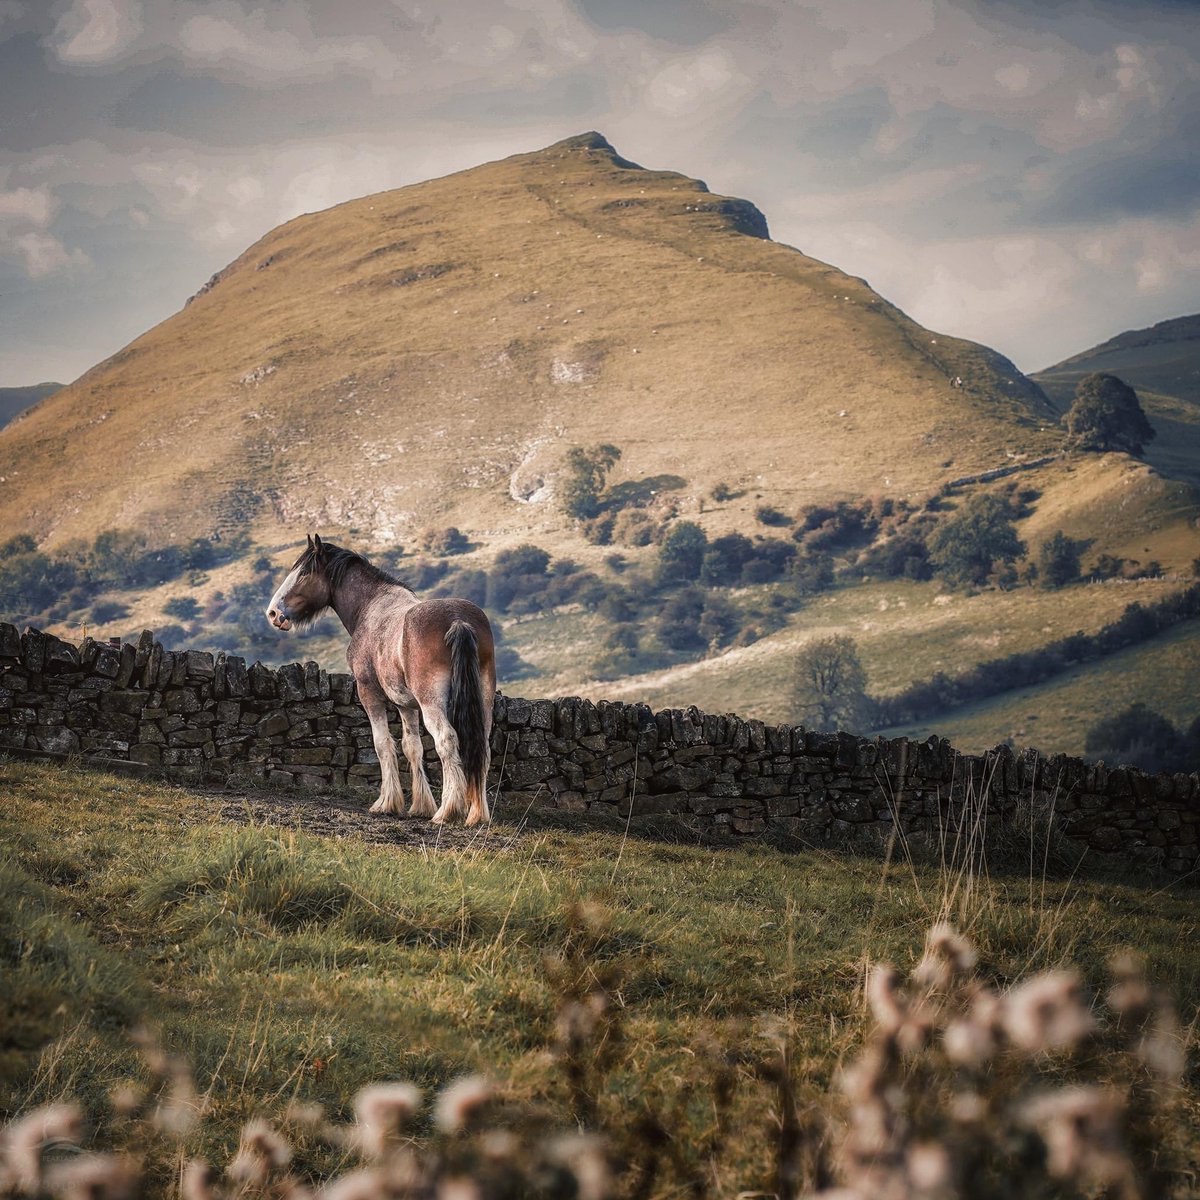 This is Chrome Hill, perhaps the peakiest peak in the #peakdistrict. It looks dramatic from every angle but I love this view of it dominating the landscape. And the rather lovely horse was a complete gift, giving me his best side and enjoying the scene as much as I was.